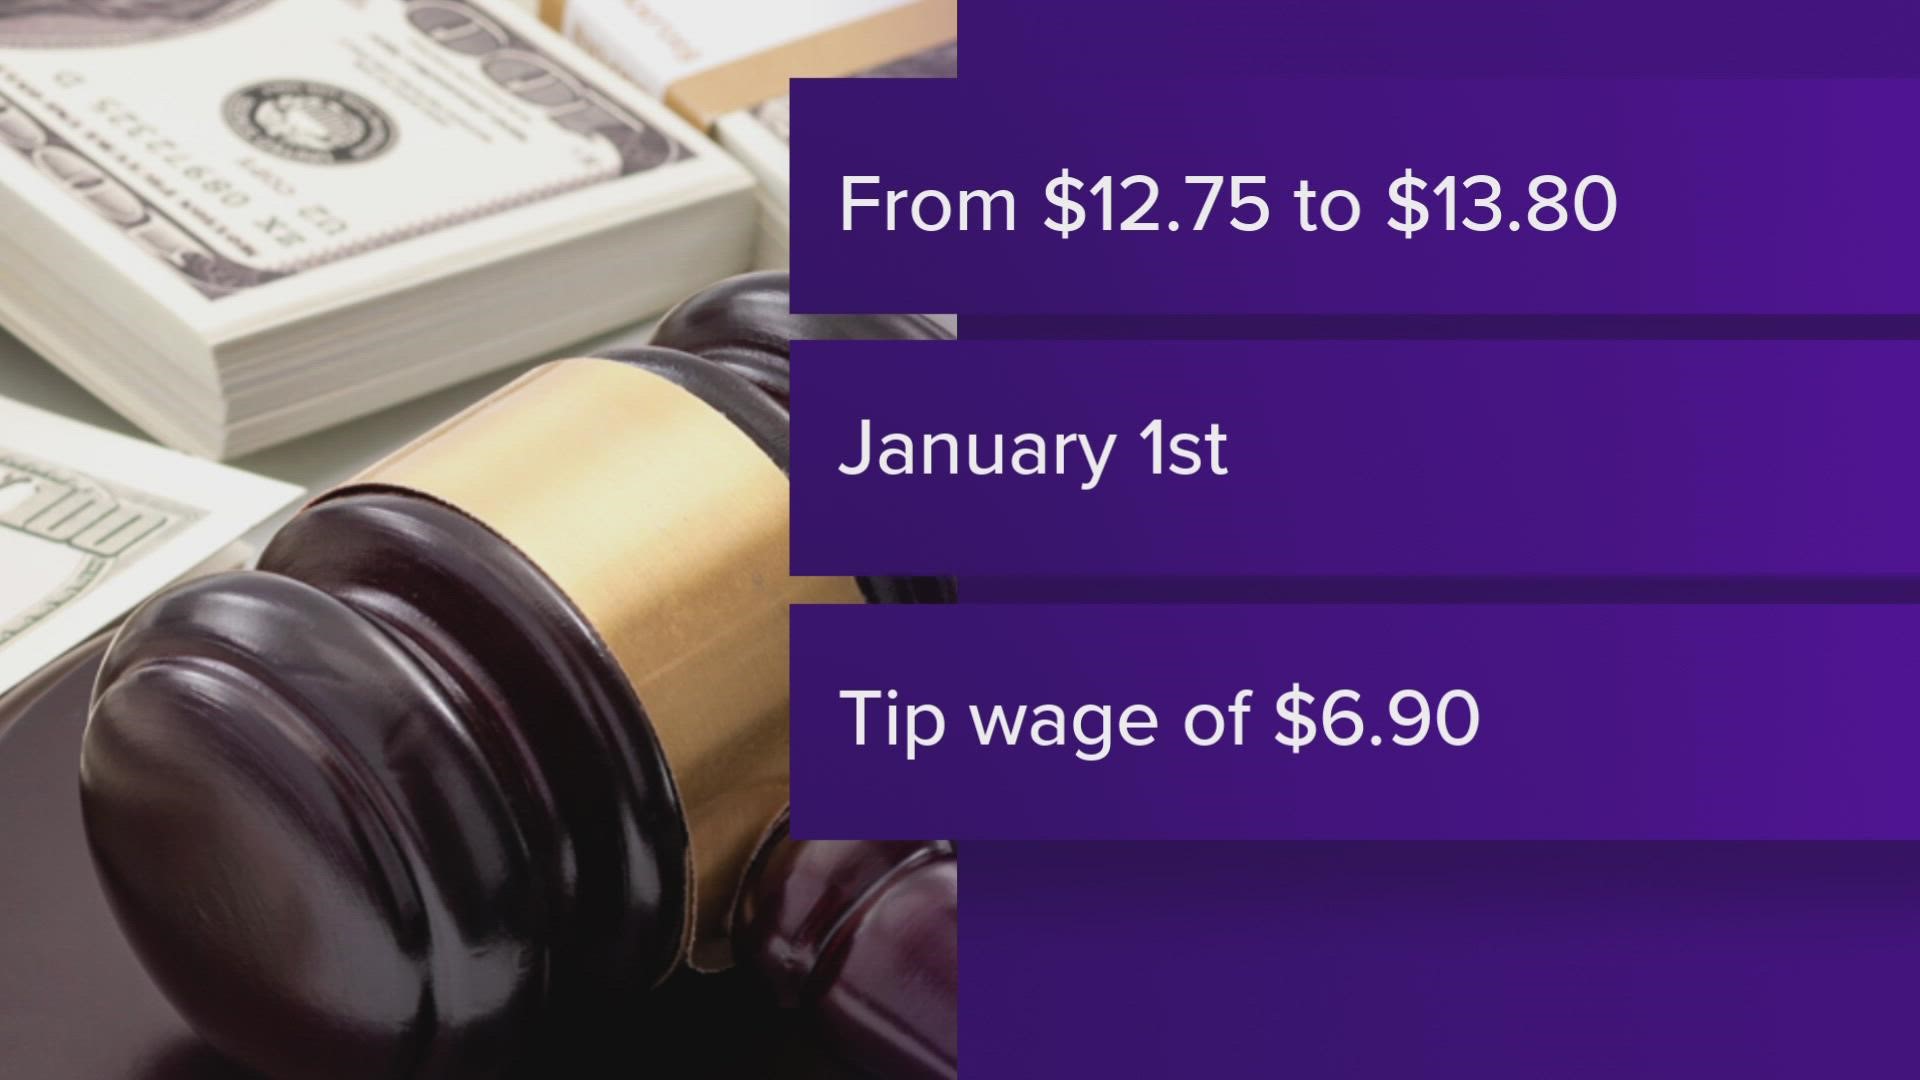 The state's minimum wage will increase from $12.75 to $13.80 per hour beginning on January 1, 2023.